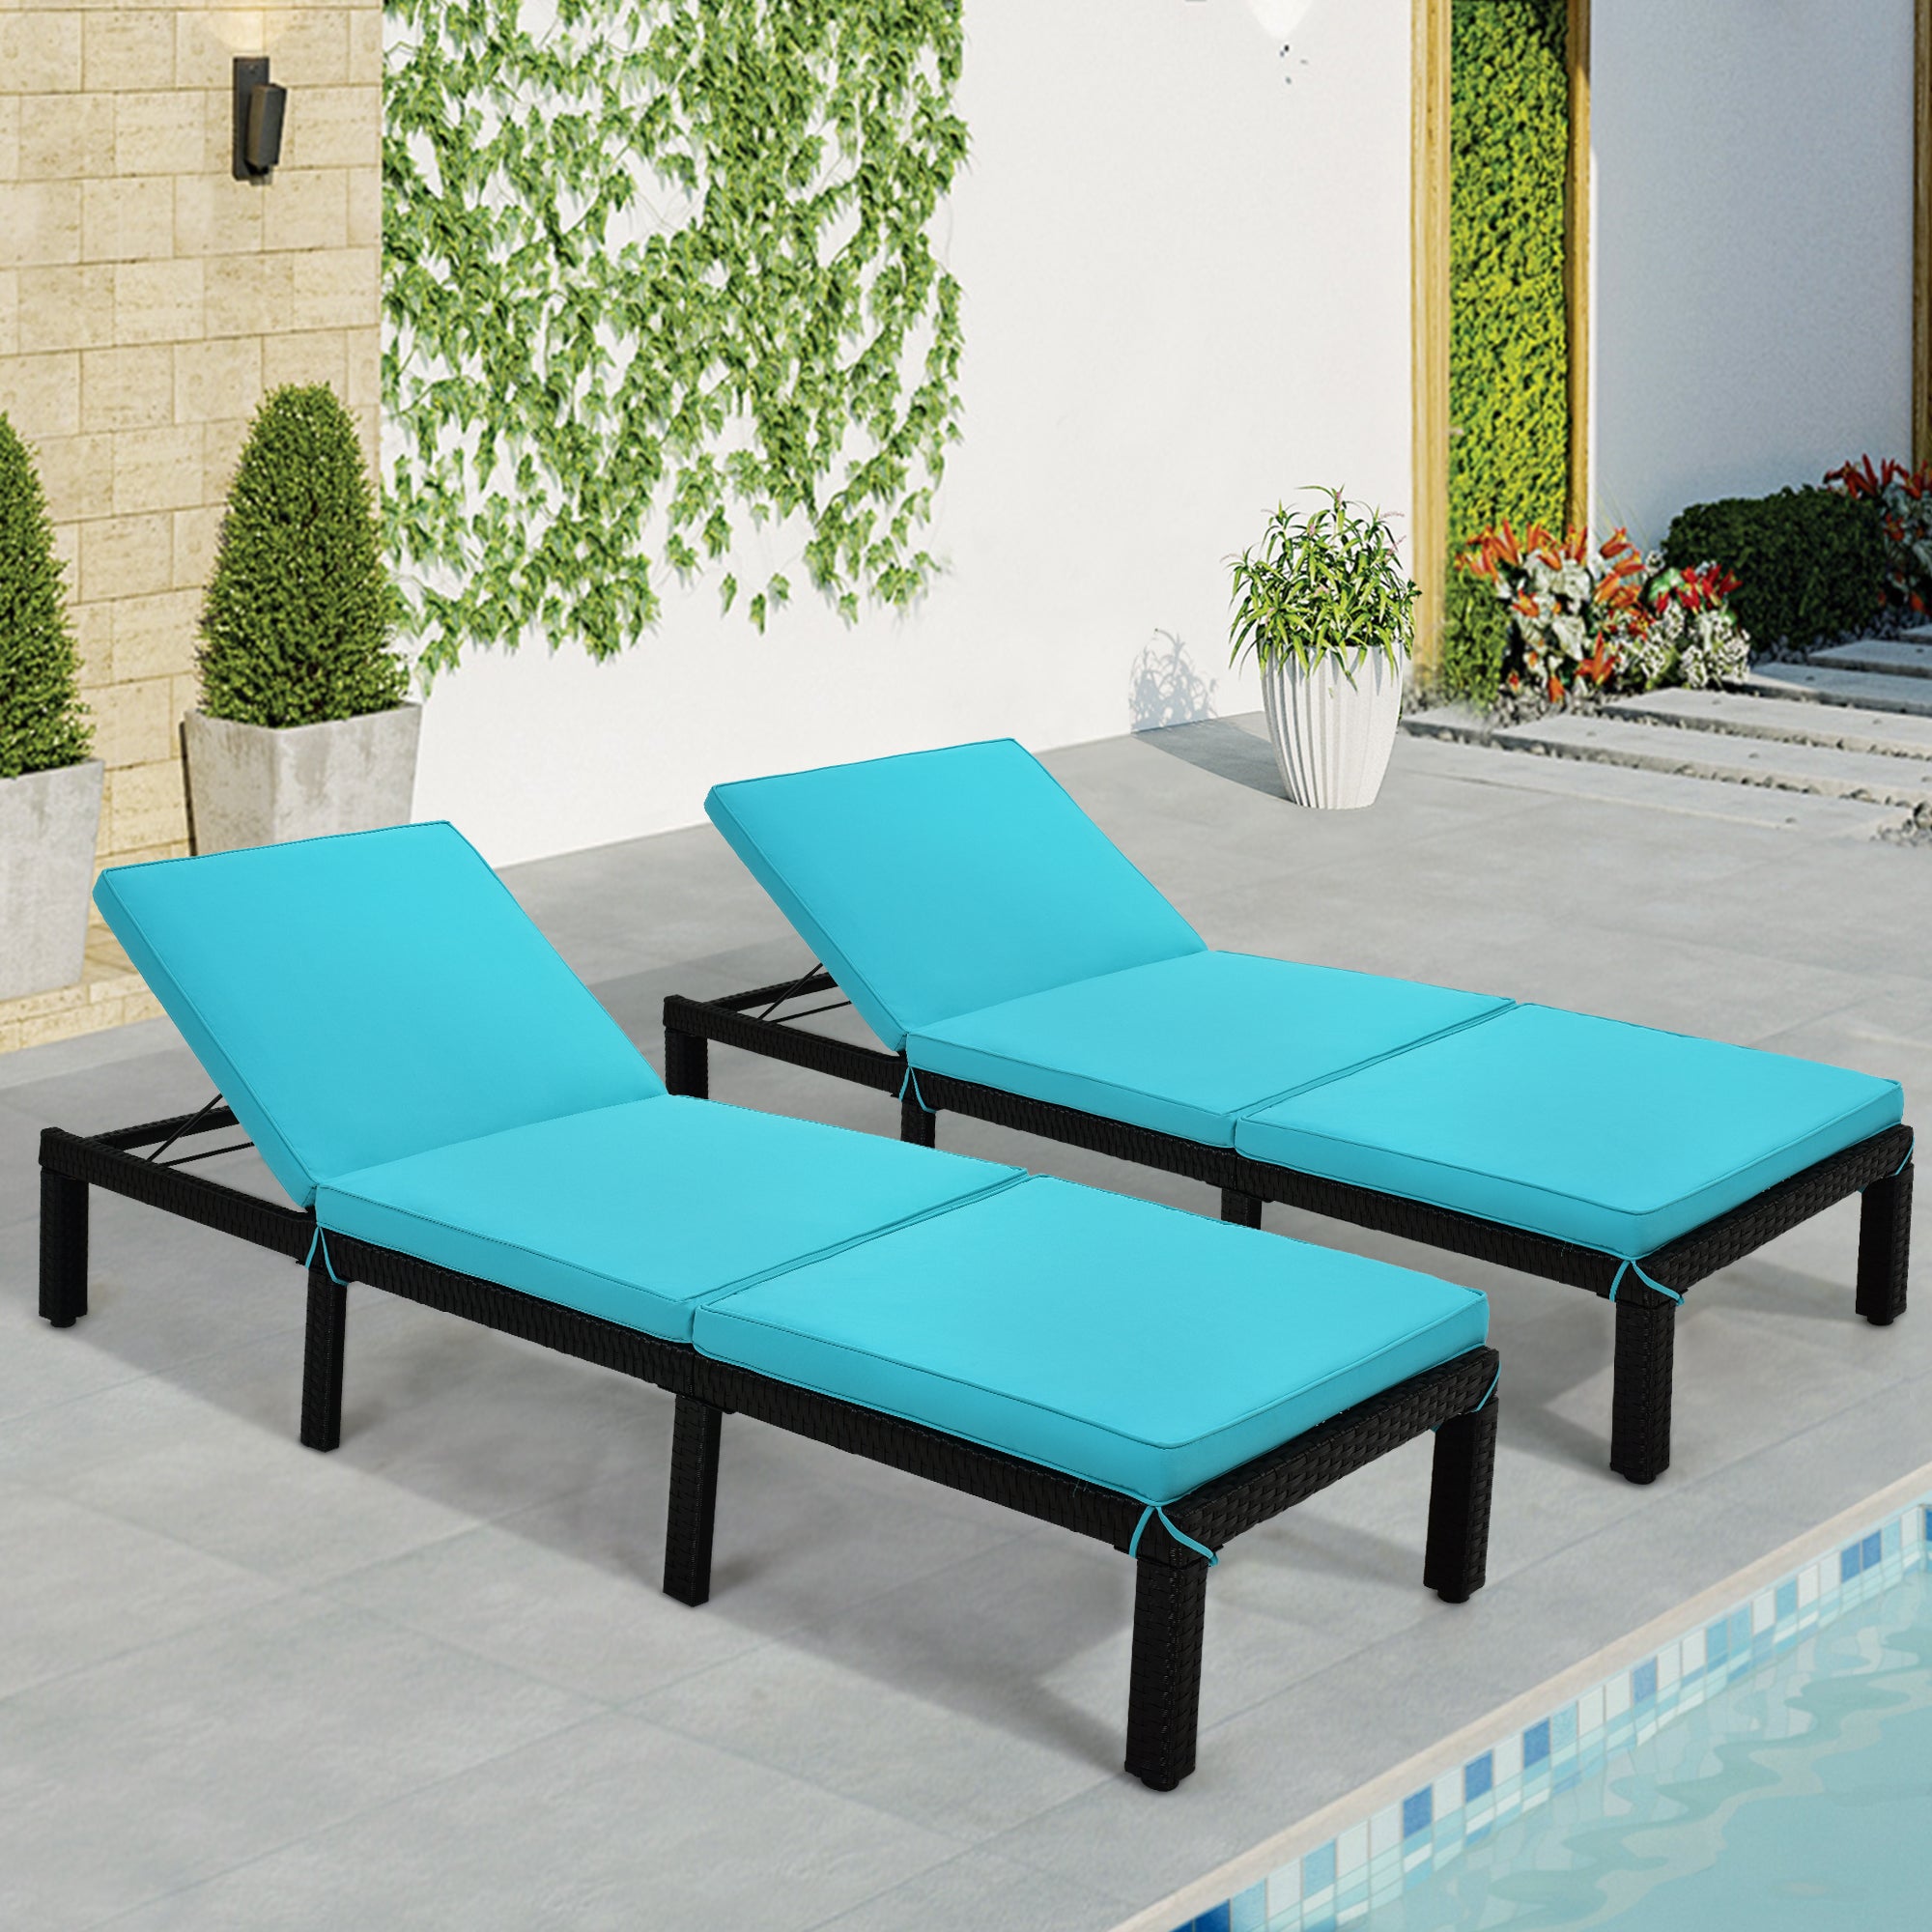 Patio Furniture Outdoor Adjustable PE Rattan Wicker Chaise Lounge Chair Sunbed